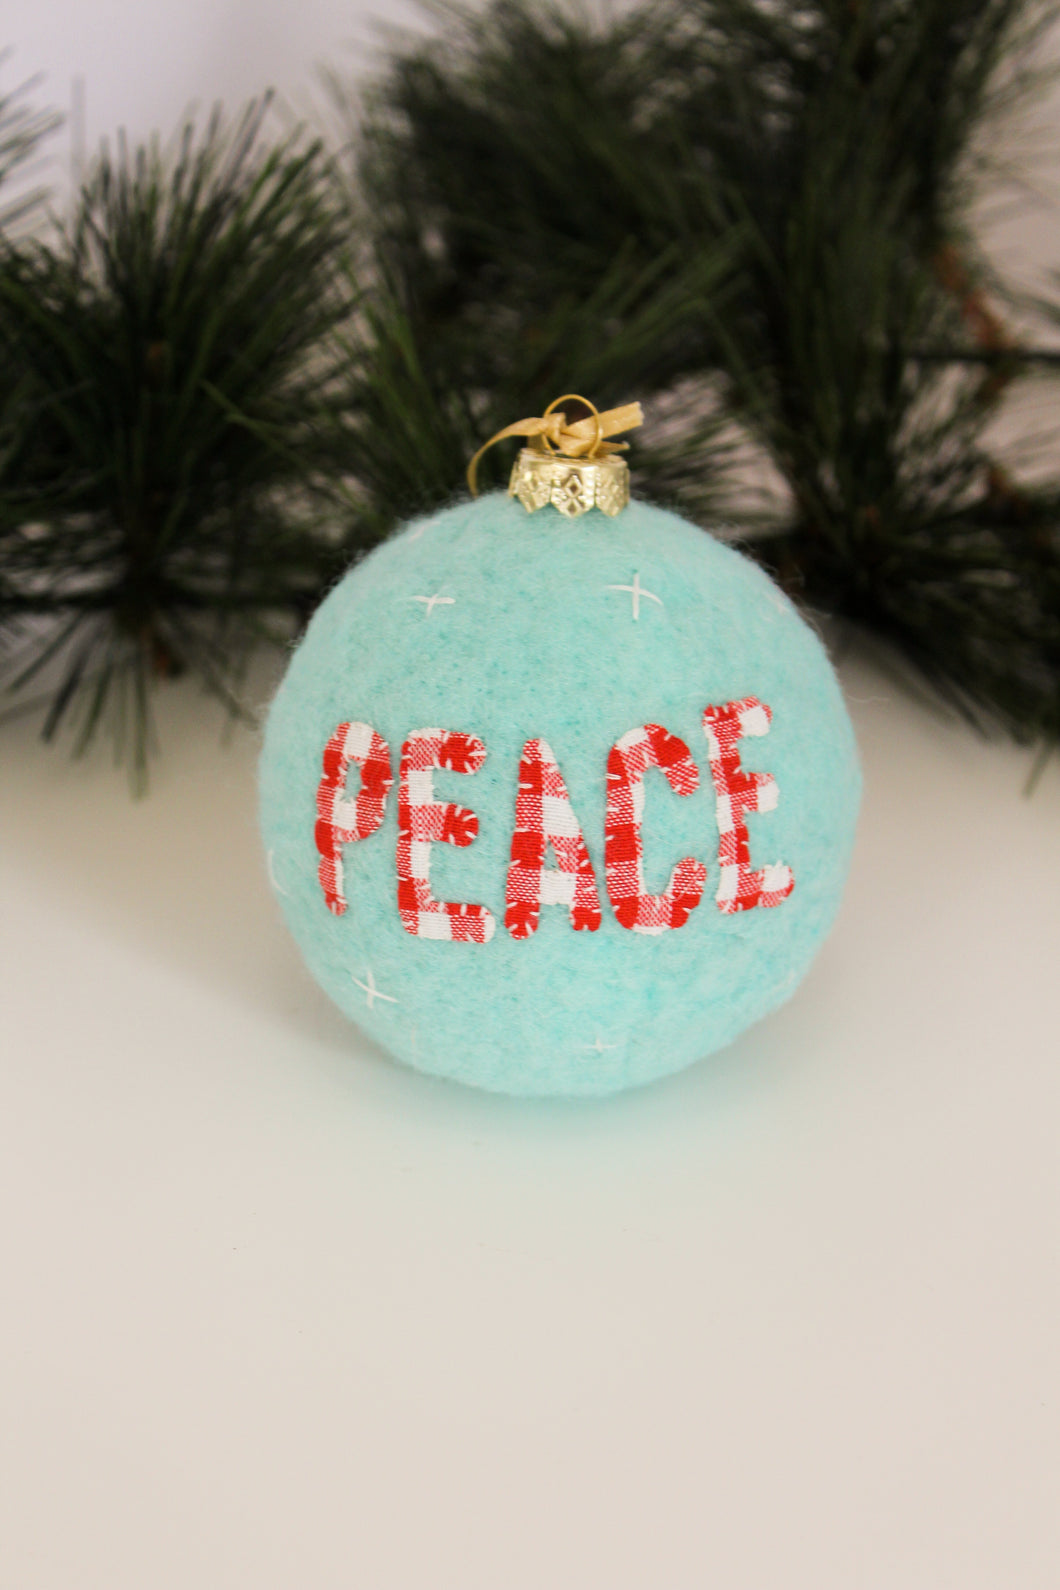 Peace Holiday Ornament